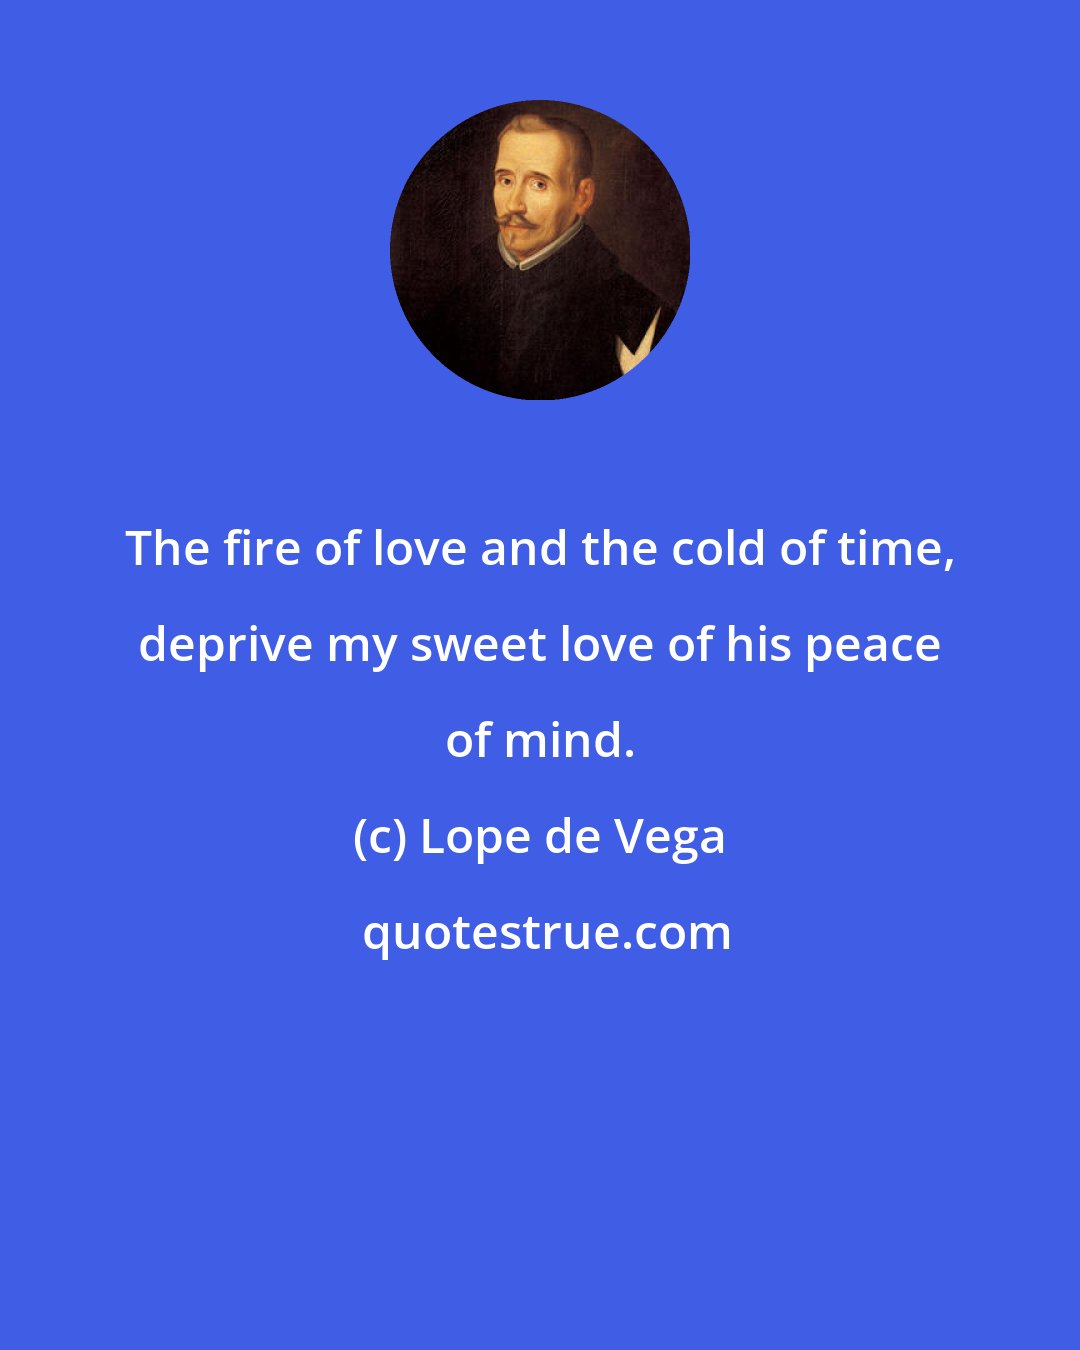 Lope de Vega: The fire of love and the cold of time, deprive my sweet love of his peace of mind.